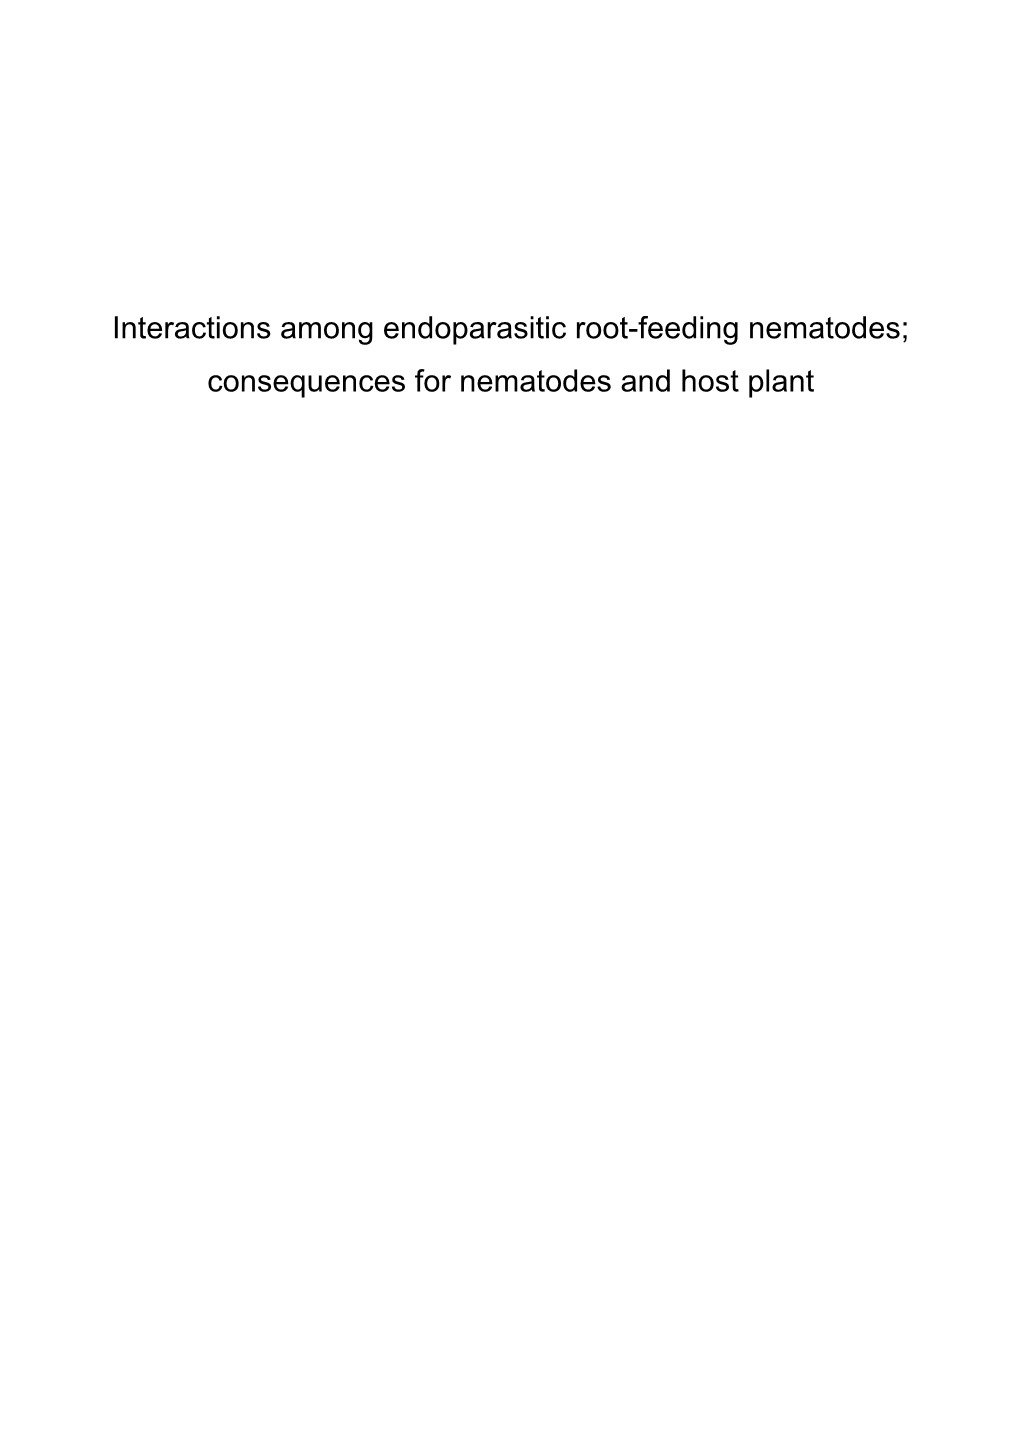 Interactions Among Endoparasitic Root-Feeding Nematodes; Consequences for Nematodes and Host Plant